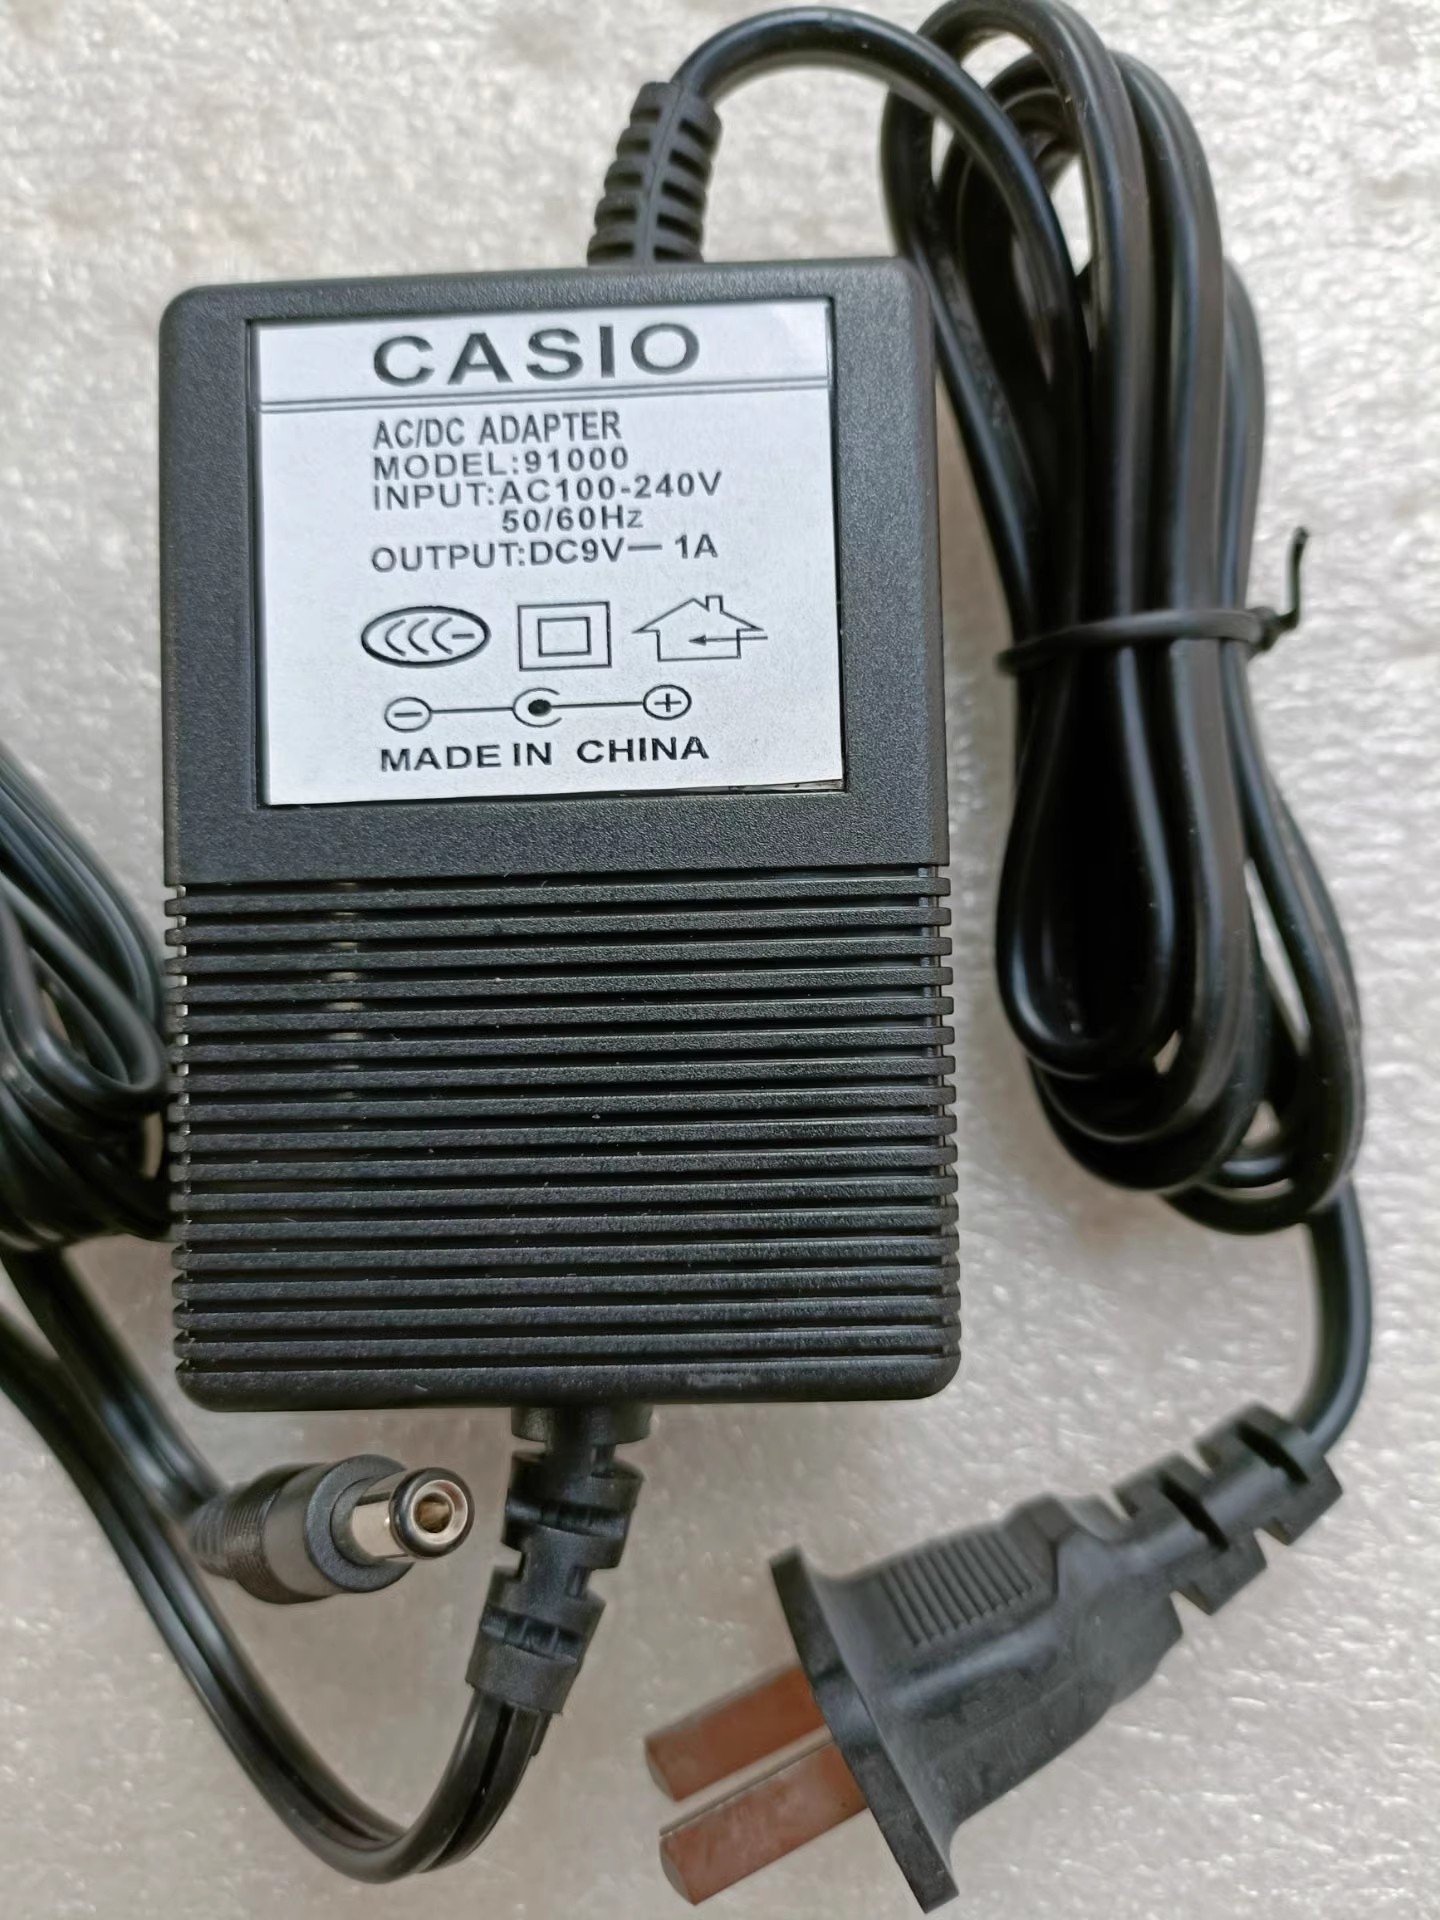 *Brand NEW*9V 1A AC DC ADAPTHE 91000 CASIO TD82 TD92 TD85 TD90 POWER Supply - Click Image to Close